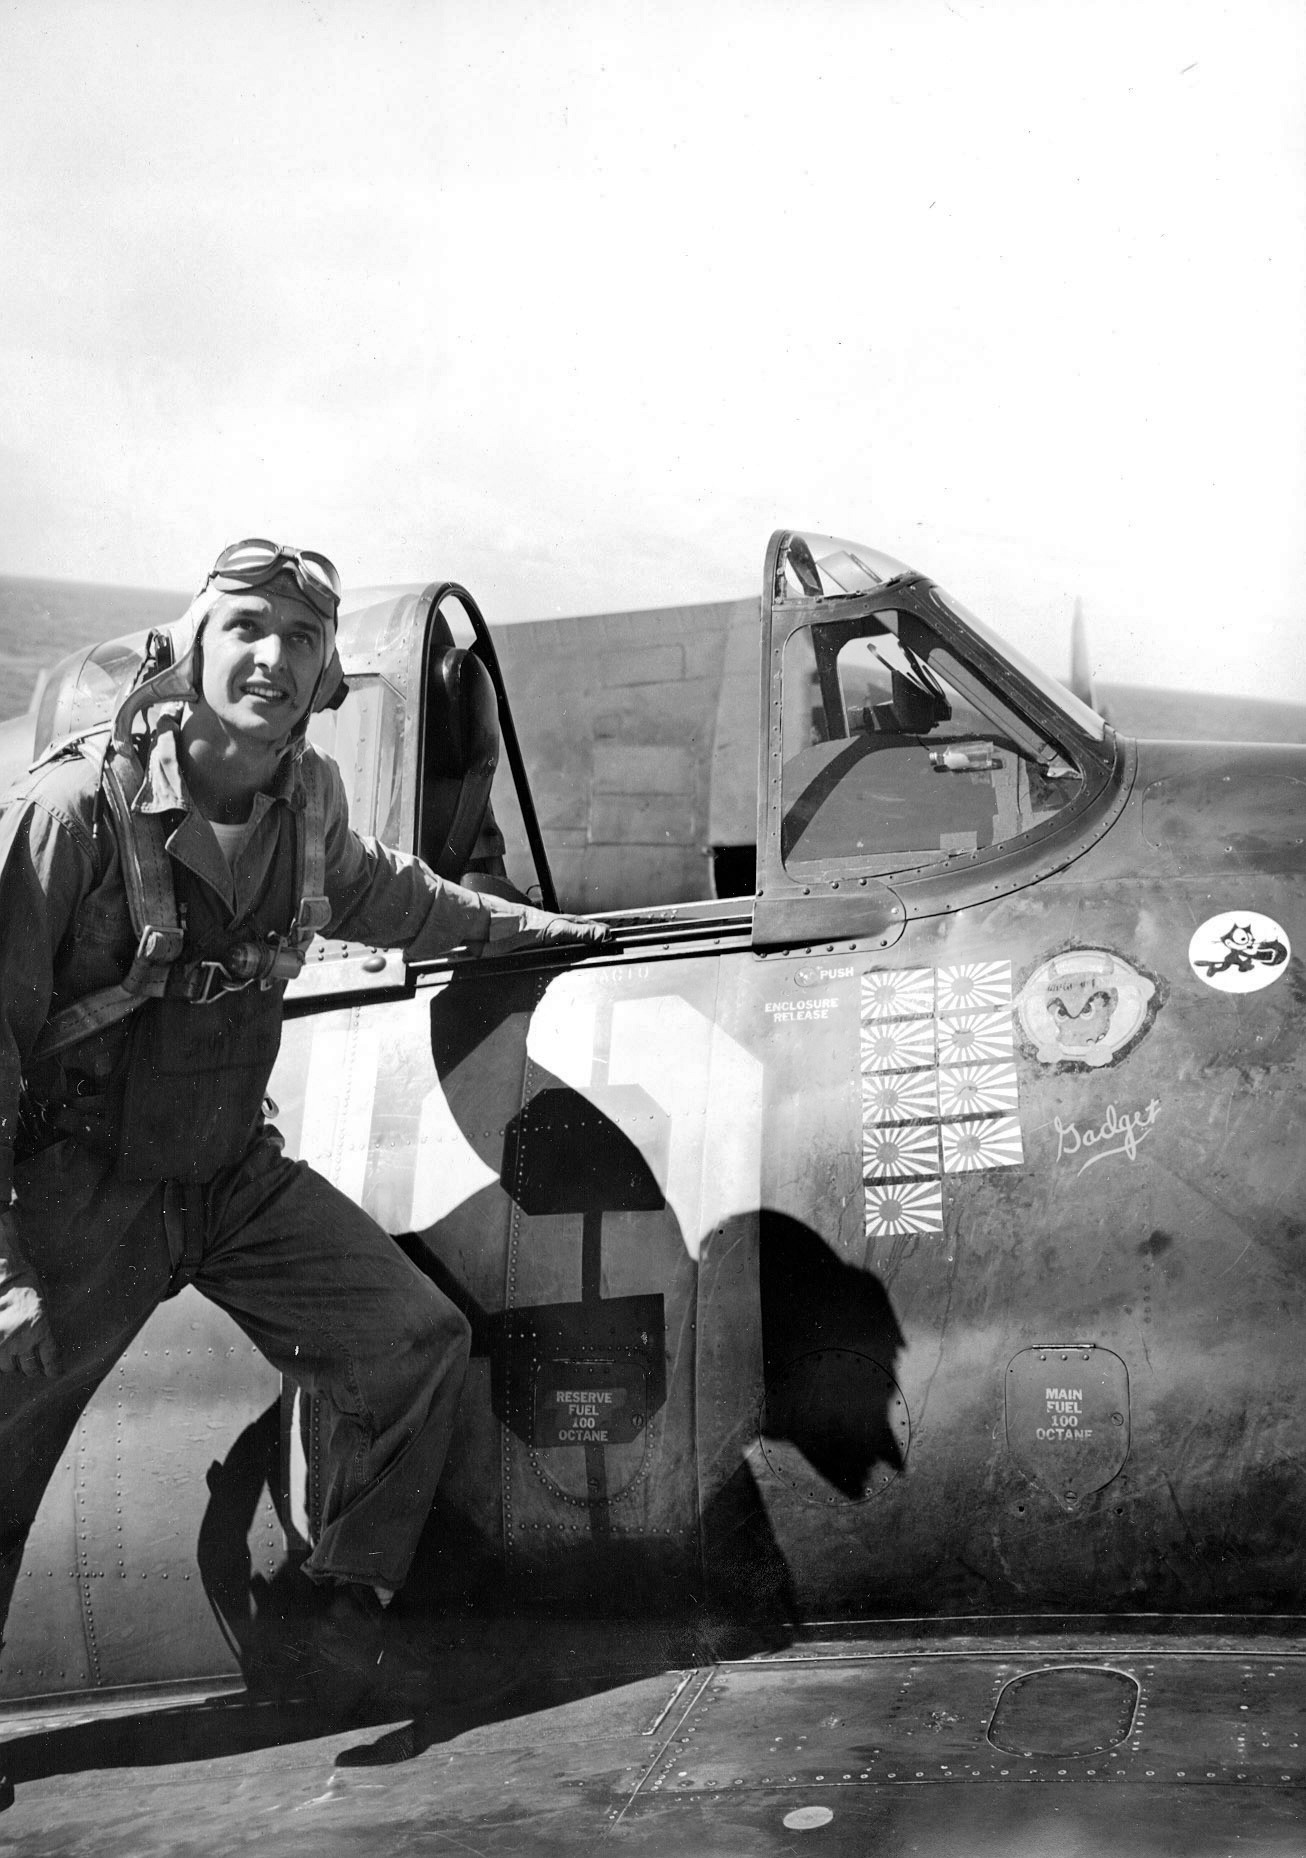 US Lt (jg) Alexander Vraciu of Fighting Squadron 6 in his F6F Hellcat 'Gadget' aboard USS Intrepid, 1944, photo 2 of 2; note markings for his first 9 kills